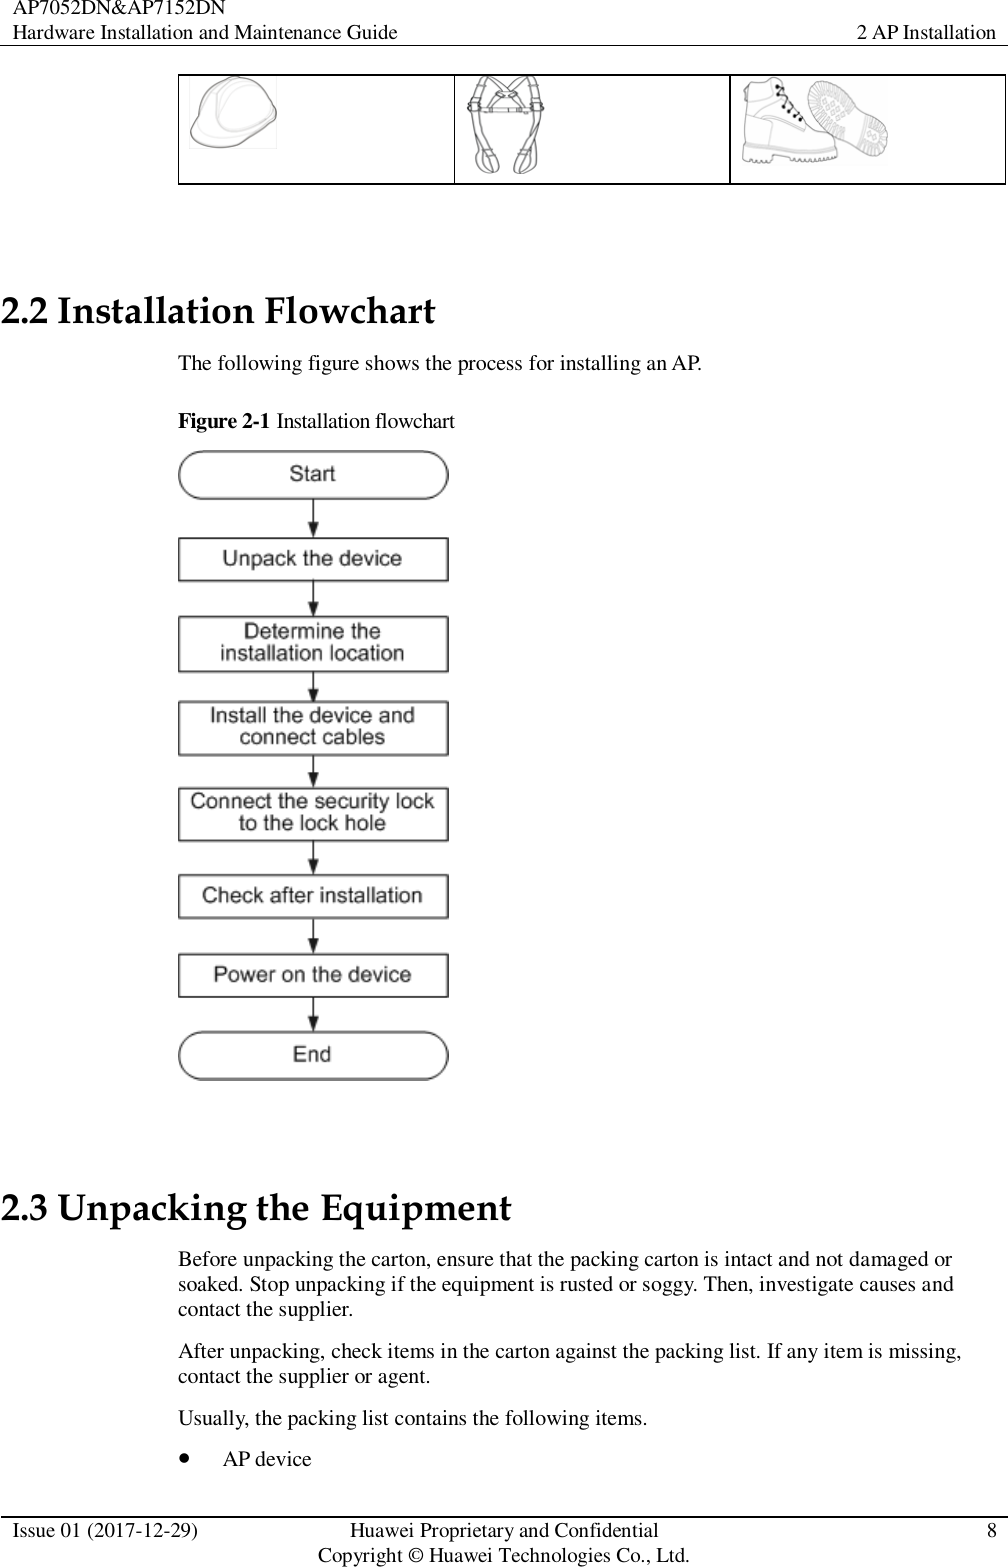 AP7052DN&amp;AP7152DN Hardware Installation and Maintenance Guide 2 AP Installation  Issue 01 (2017-12-29) Huawei Proprietary and Confidential                                     Copyright © Huawei Technologies Co., Ltd. 8      2.2 Installation Flowchart The following figure shows the process for installing an AP. Figure 2-1 Installation flowchart   2.3 Unpacking the Equipment Before unpacking the carton, ensure that the packing carton is intact and not damaged or soaked. Stop unpacking if the equipment is rusted or soggy. Then, investigate causes and contact the supplier. After unpacking, check items in the carton against the packing list. If any item is missing, contact the supplier or agent. Usually, the packing list contains the following items.    AP device 